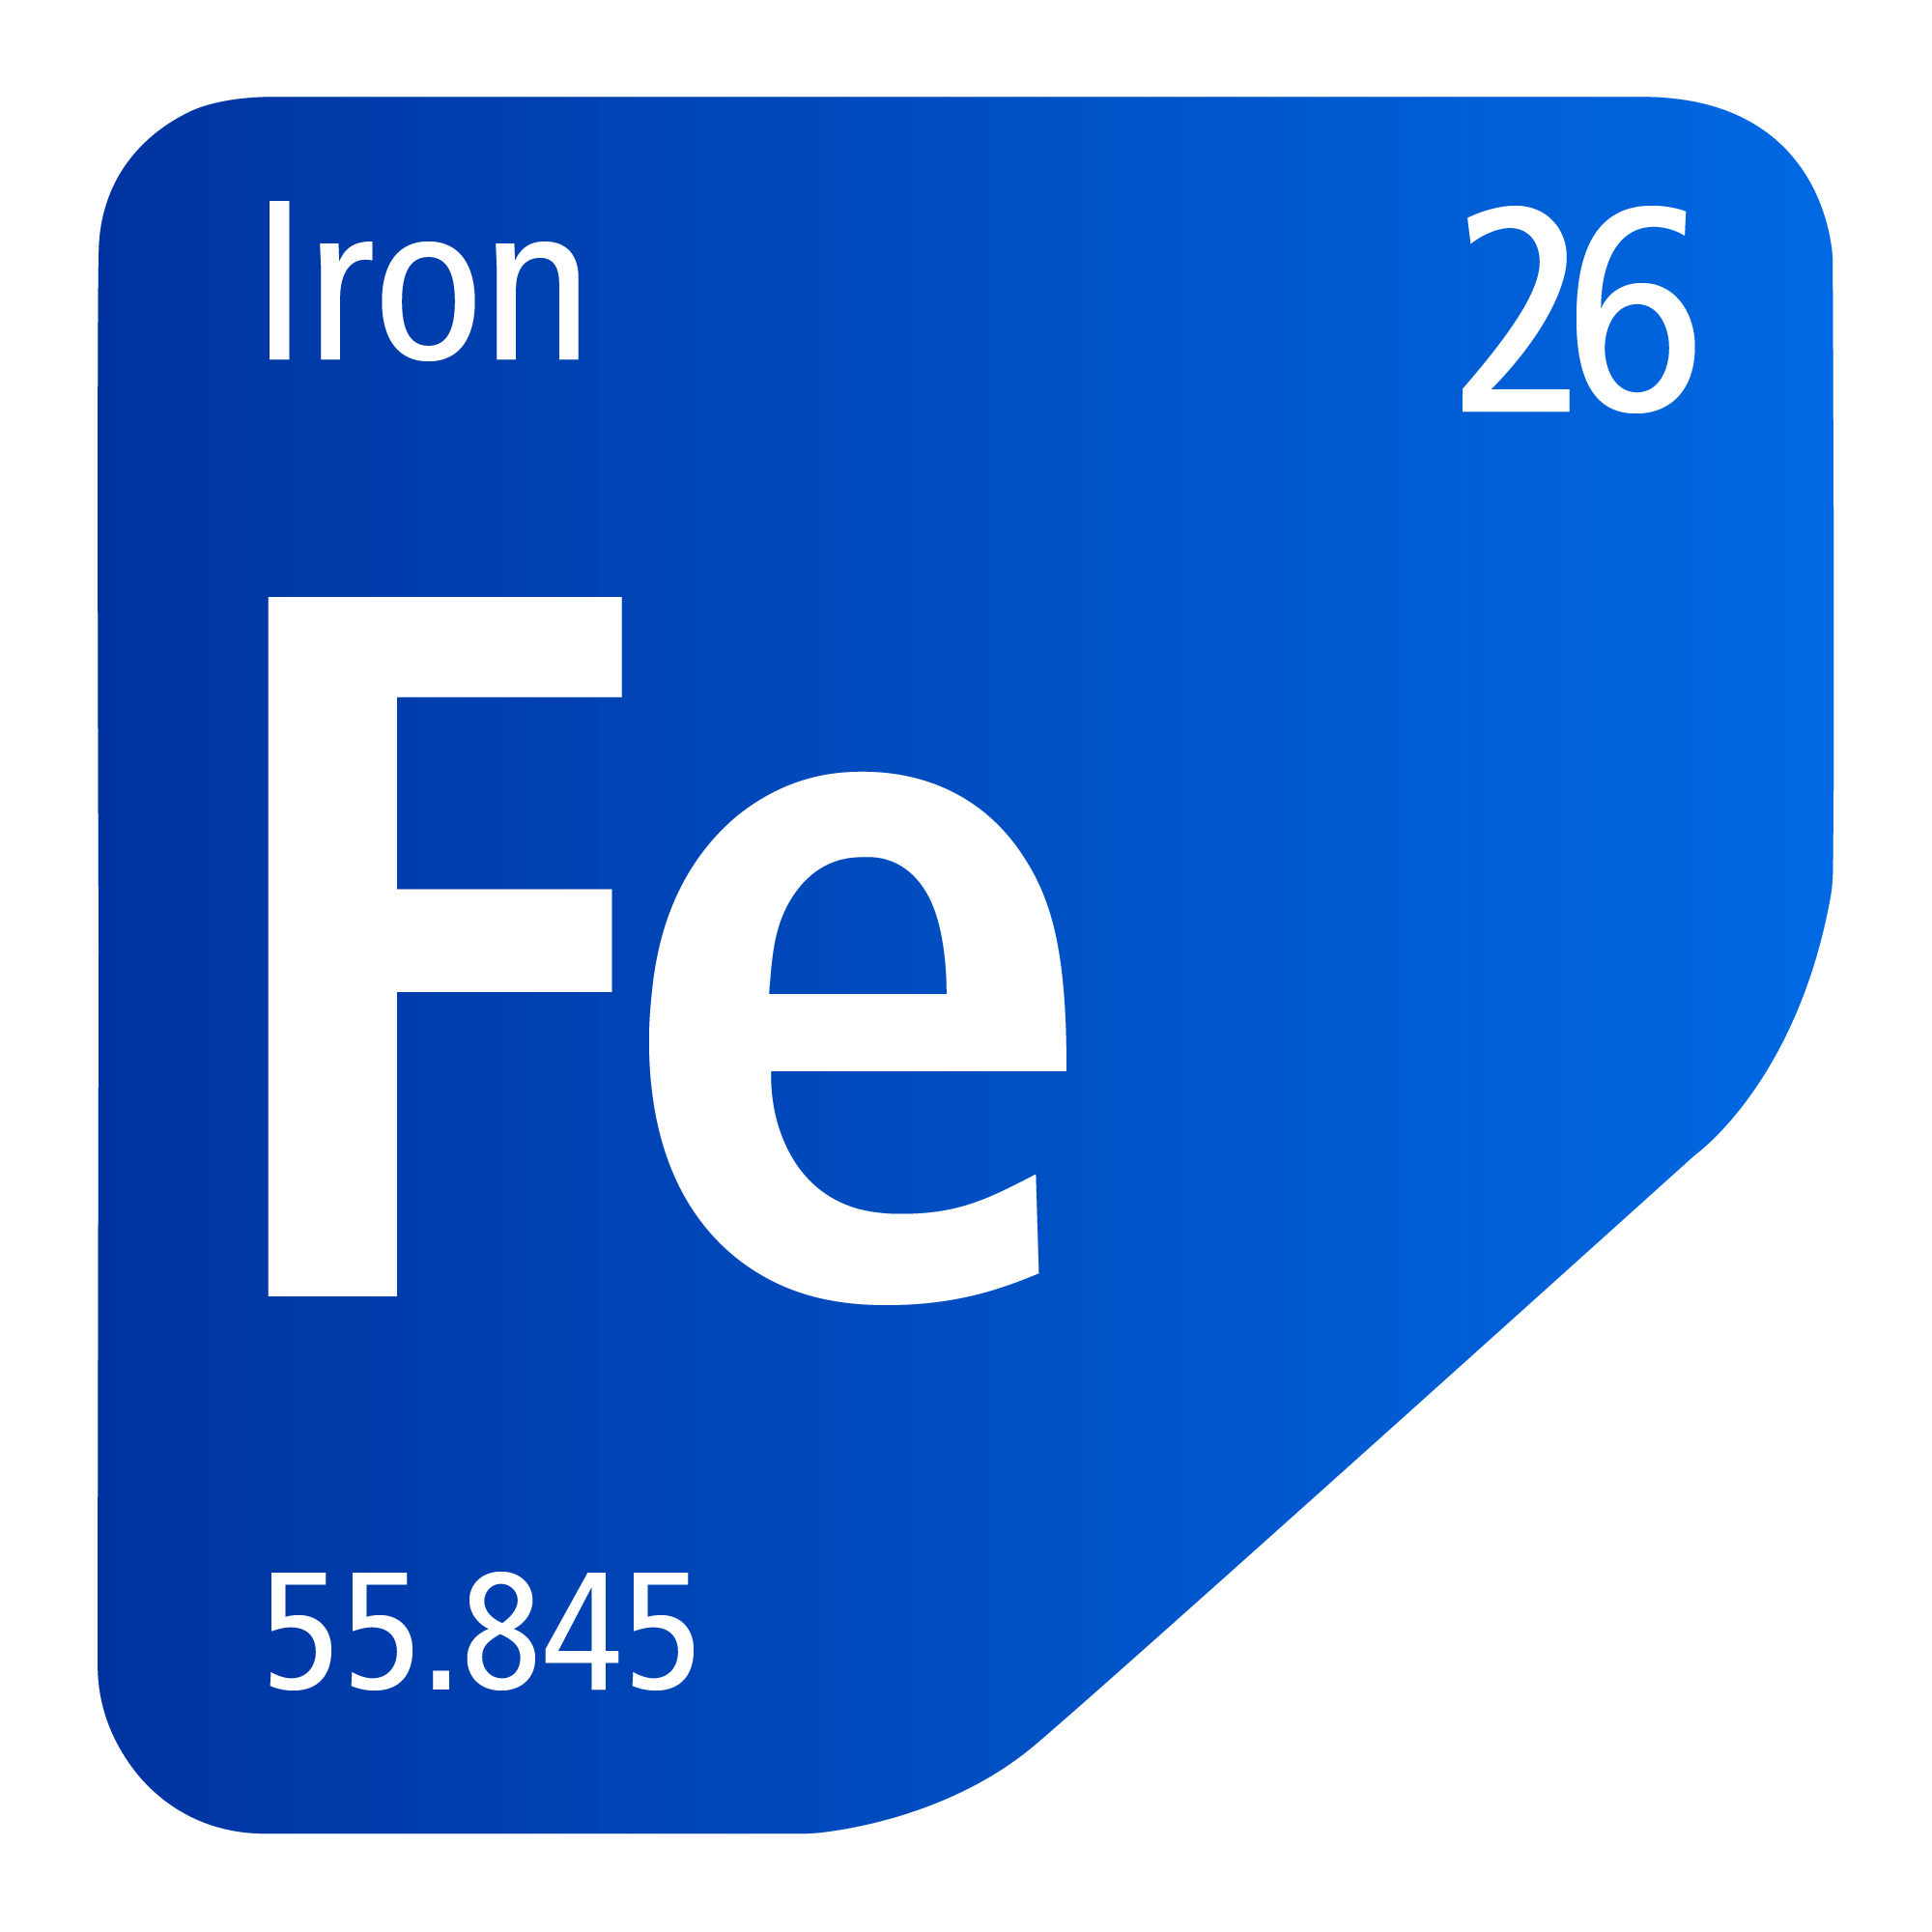 List of Behansar products in Iron category